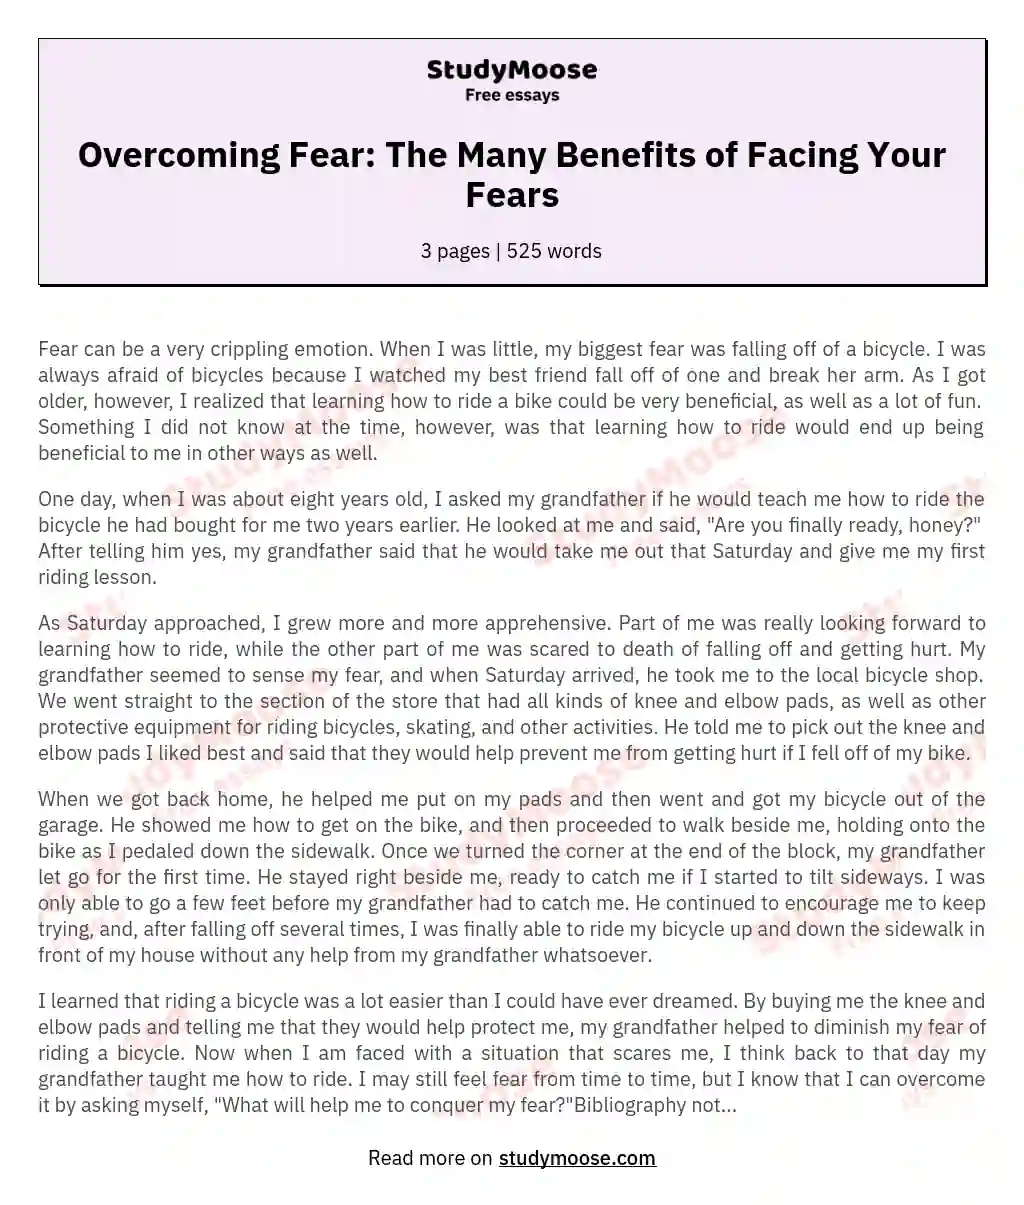 Overcoming Fear: The Many Benefits of Facing Your Fears essay